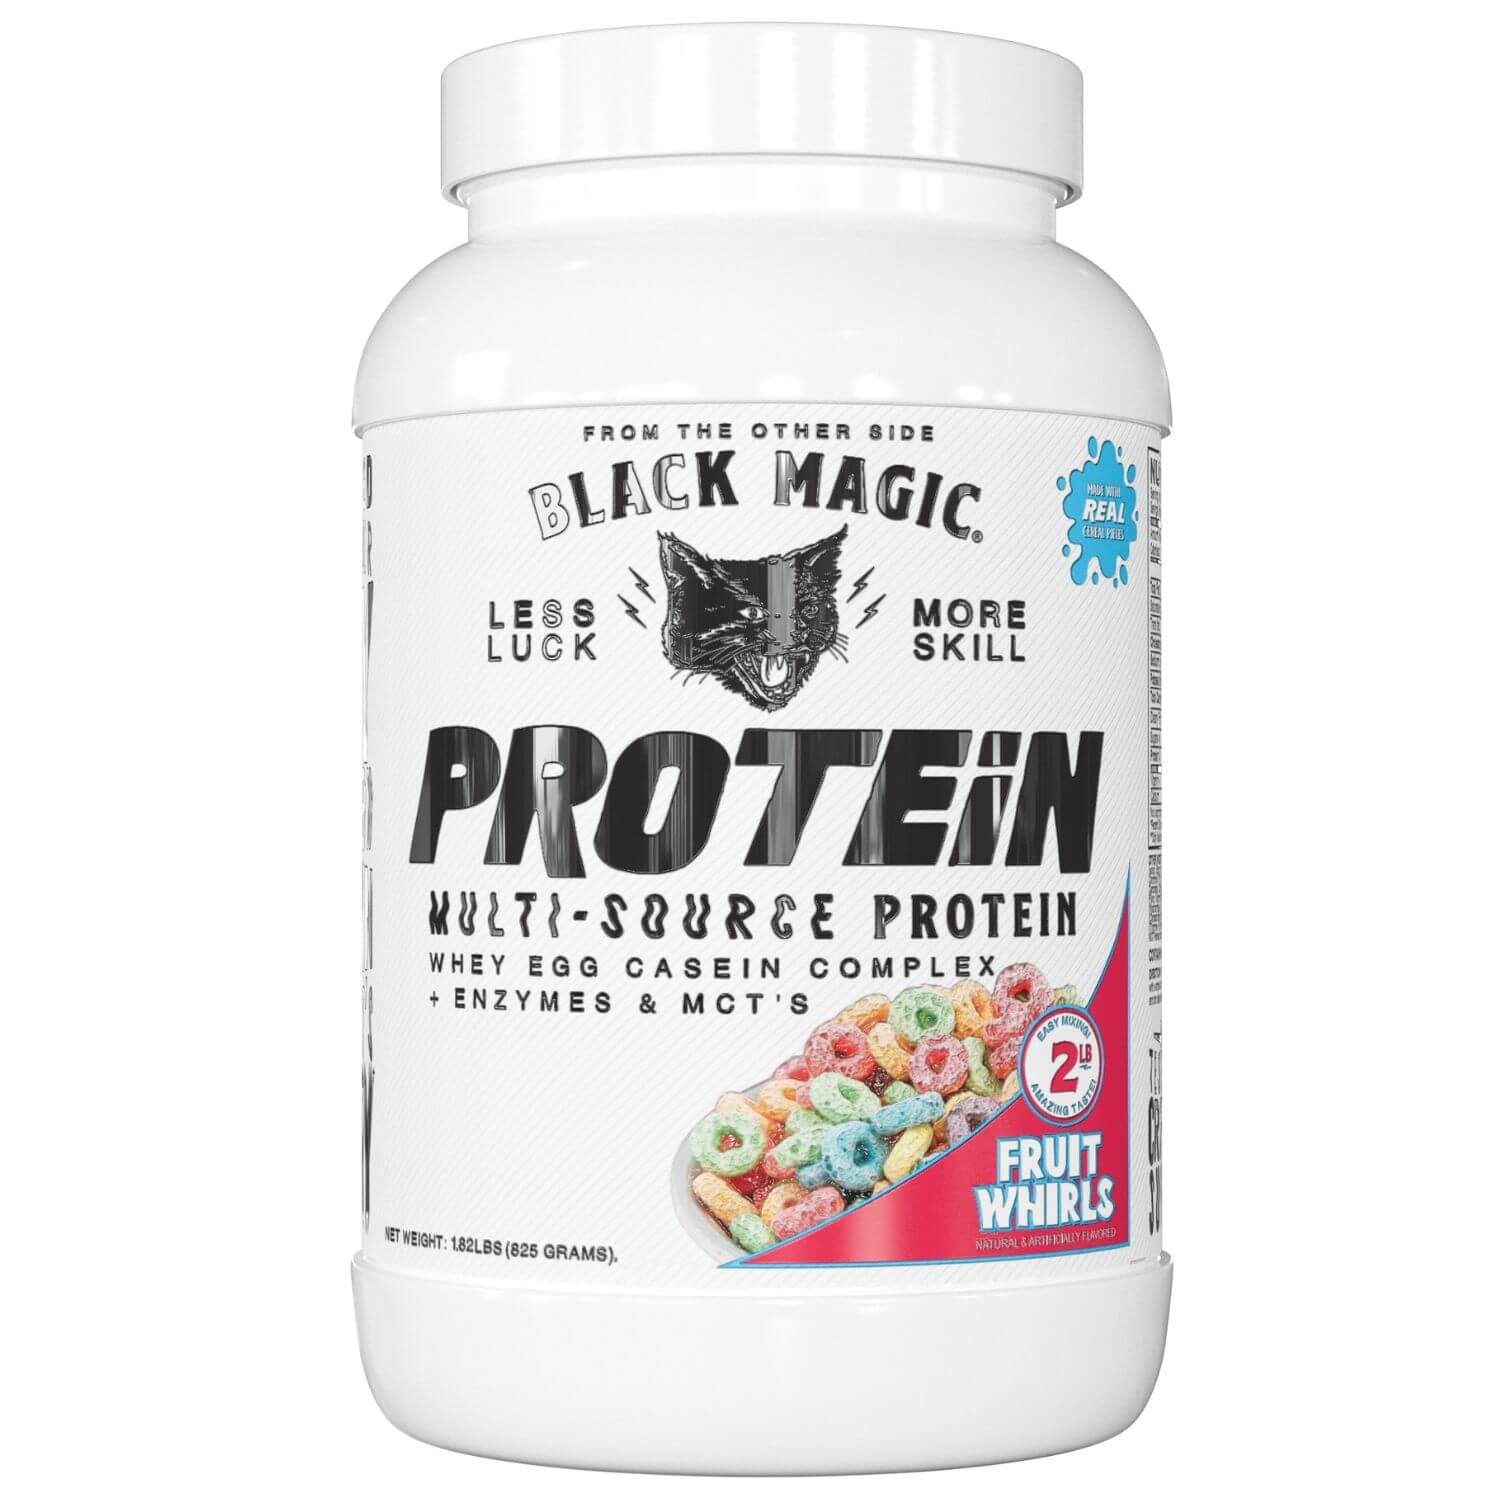 Black Magic - Handcrafted Multi-source Protein Fruit Whirls - 25 Servings